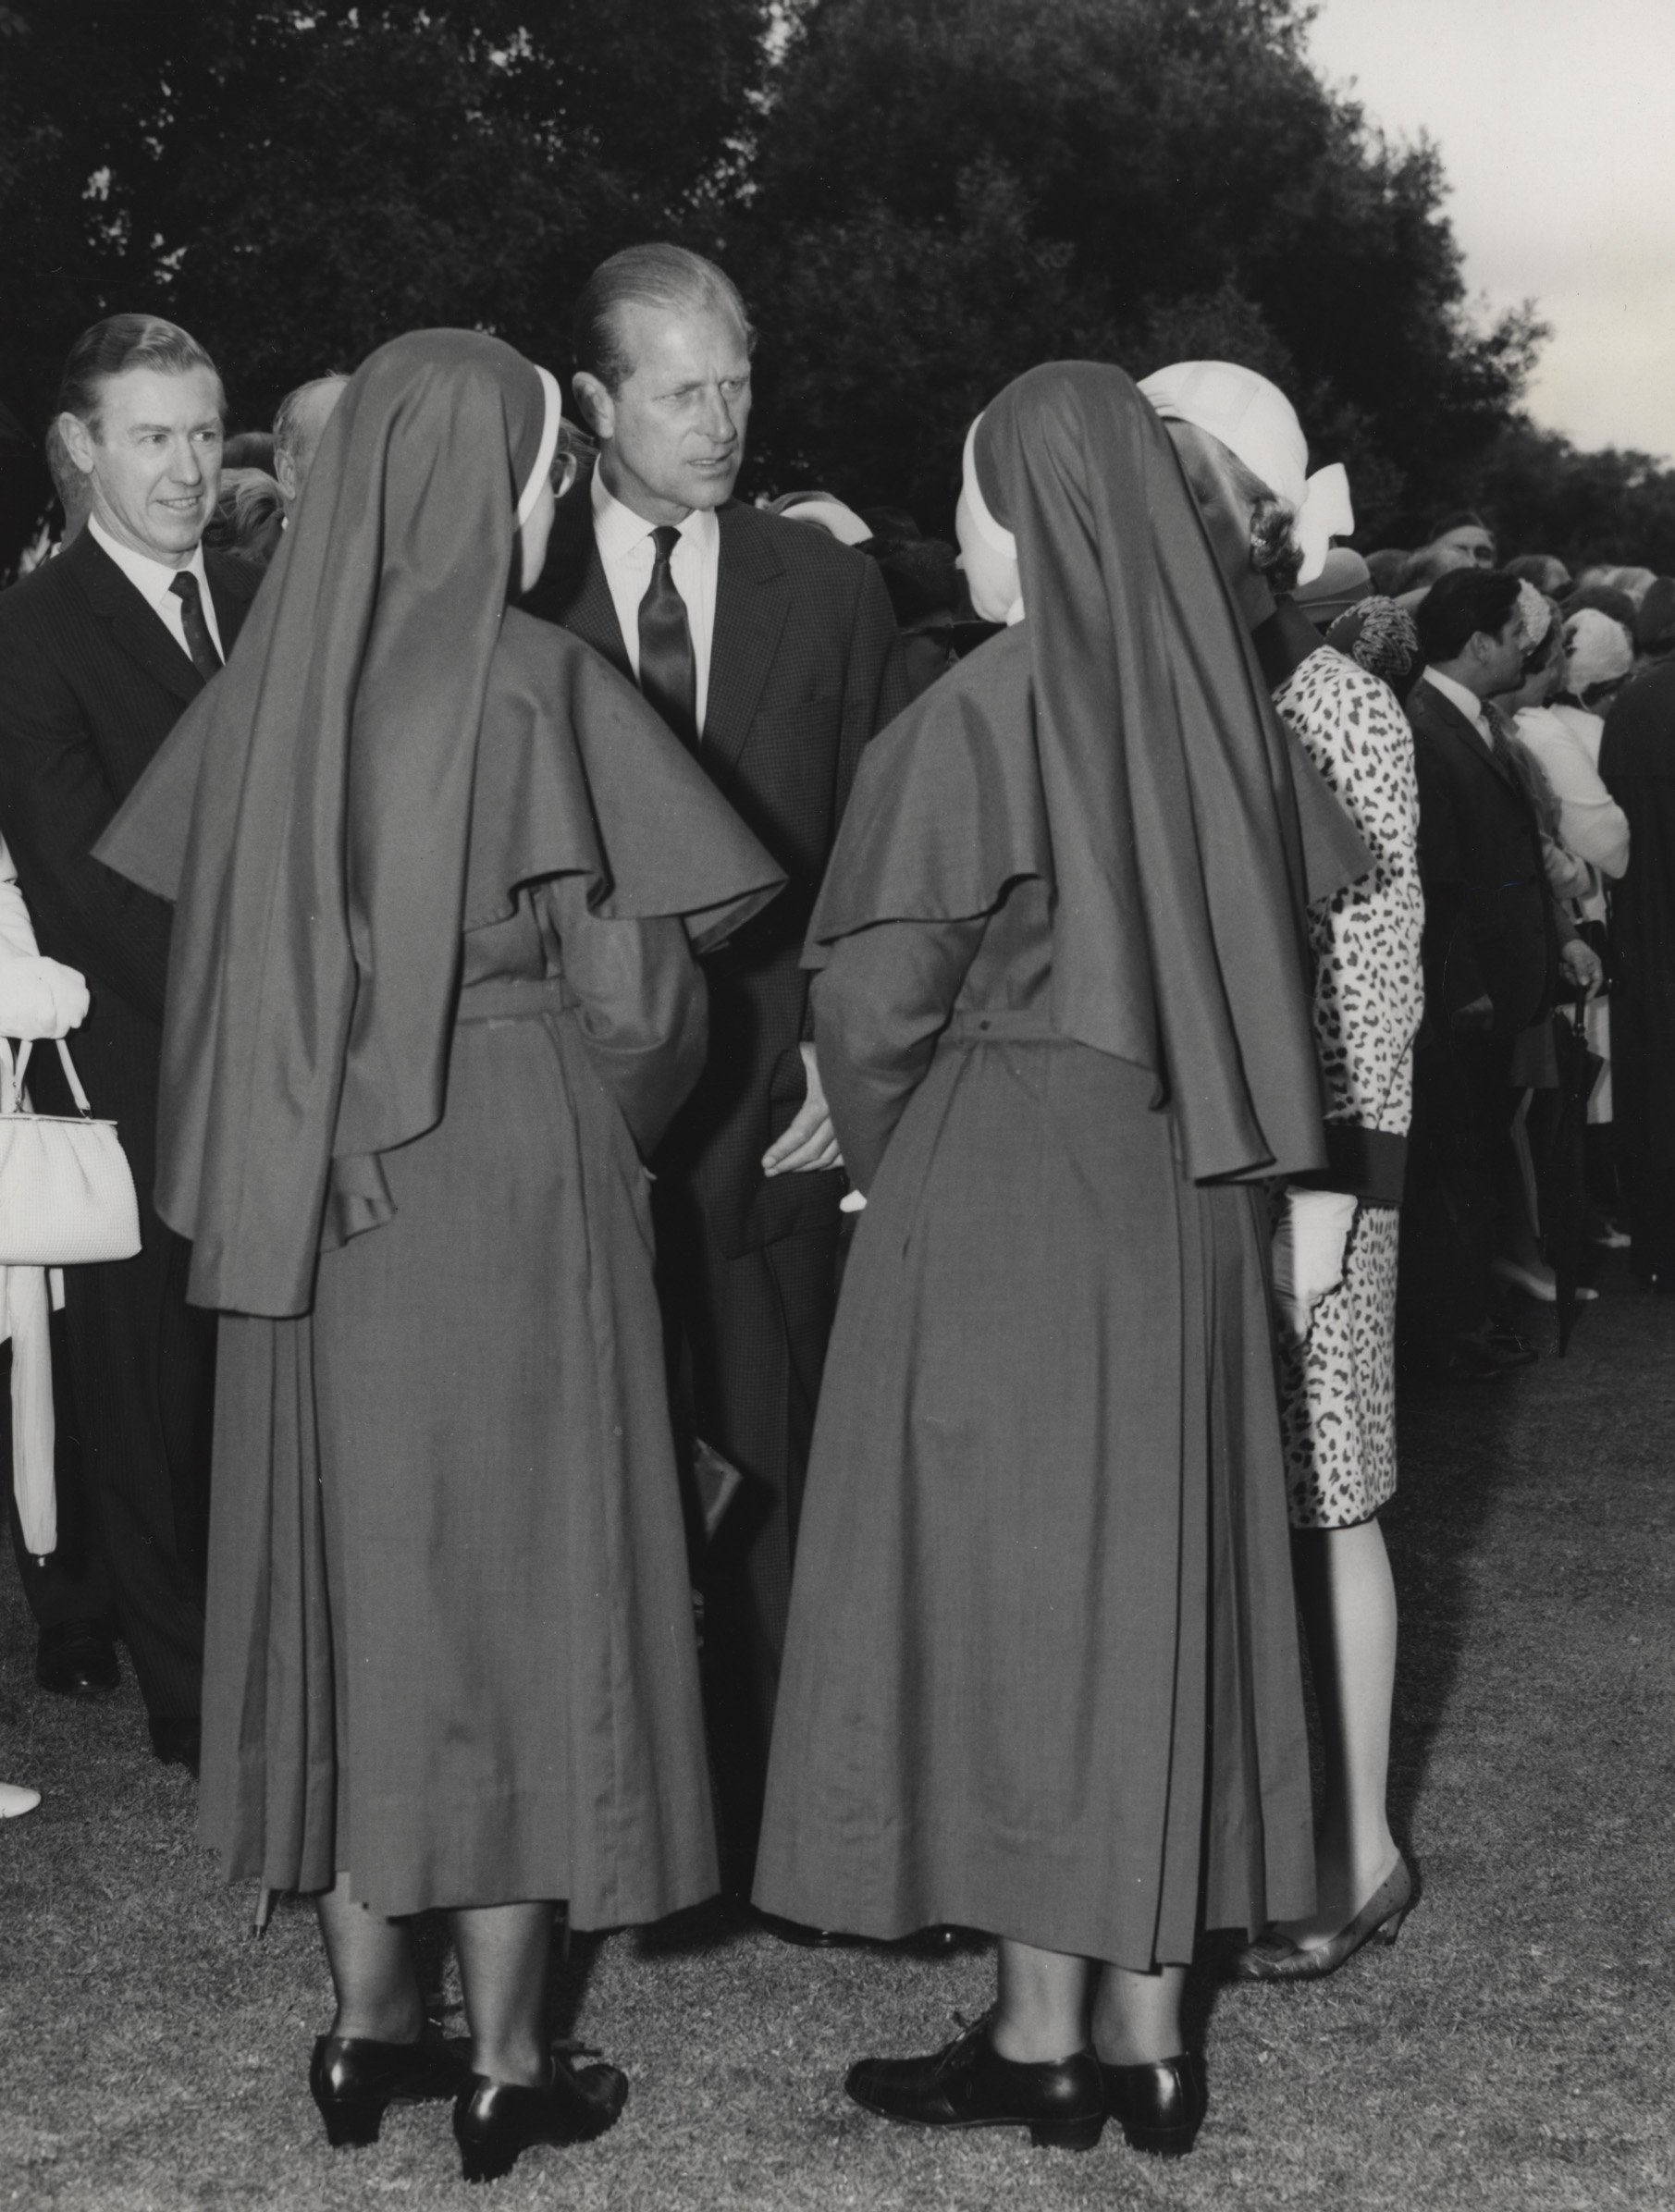  Two Sisters meeting Prince Philip, Duke of Edinburgh, at Government House, Sydney 31 March 1970 